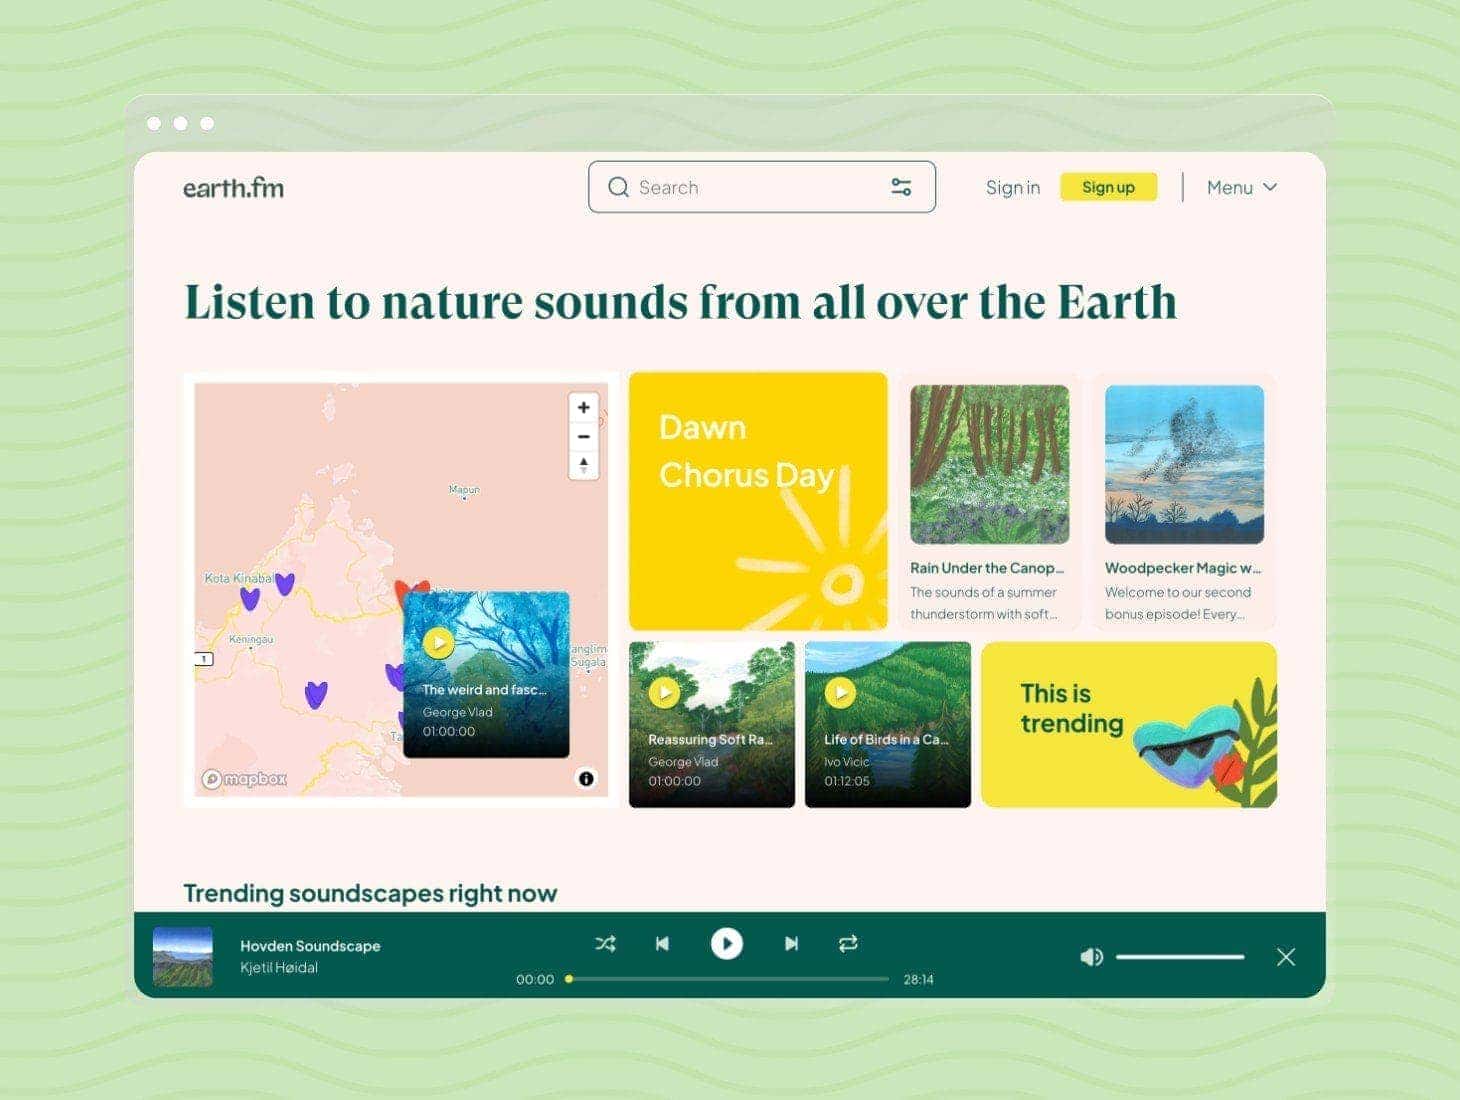 Earth.fm: Listen to nature sounds from all over the Earth